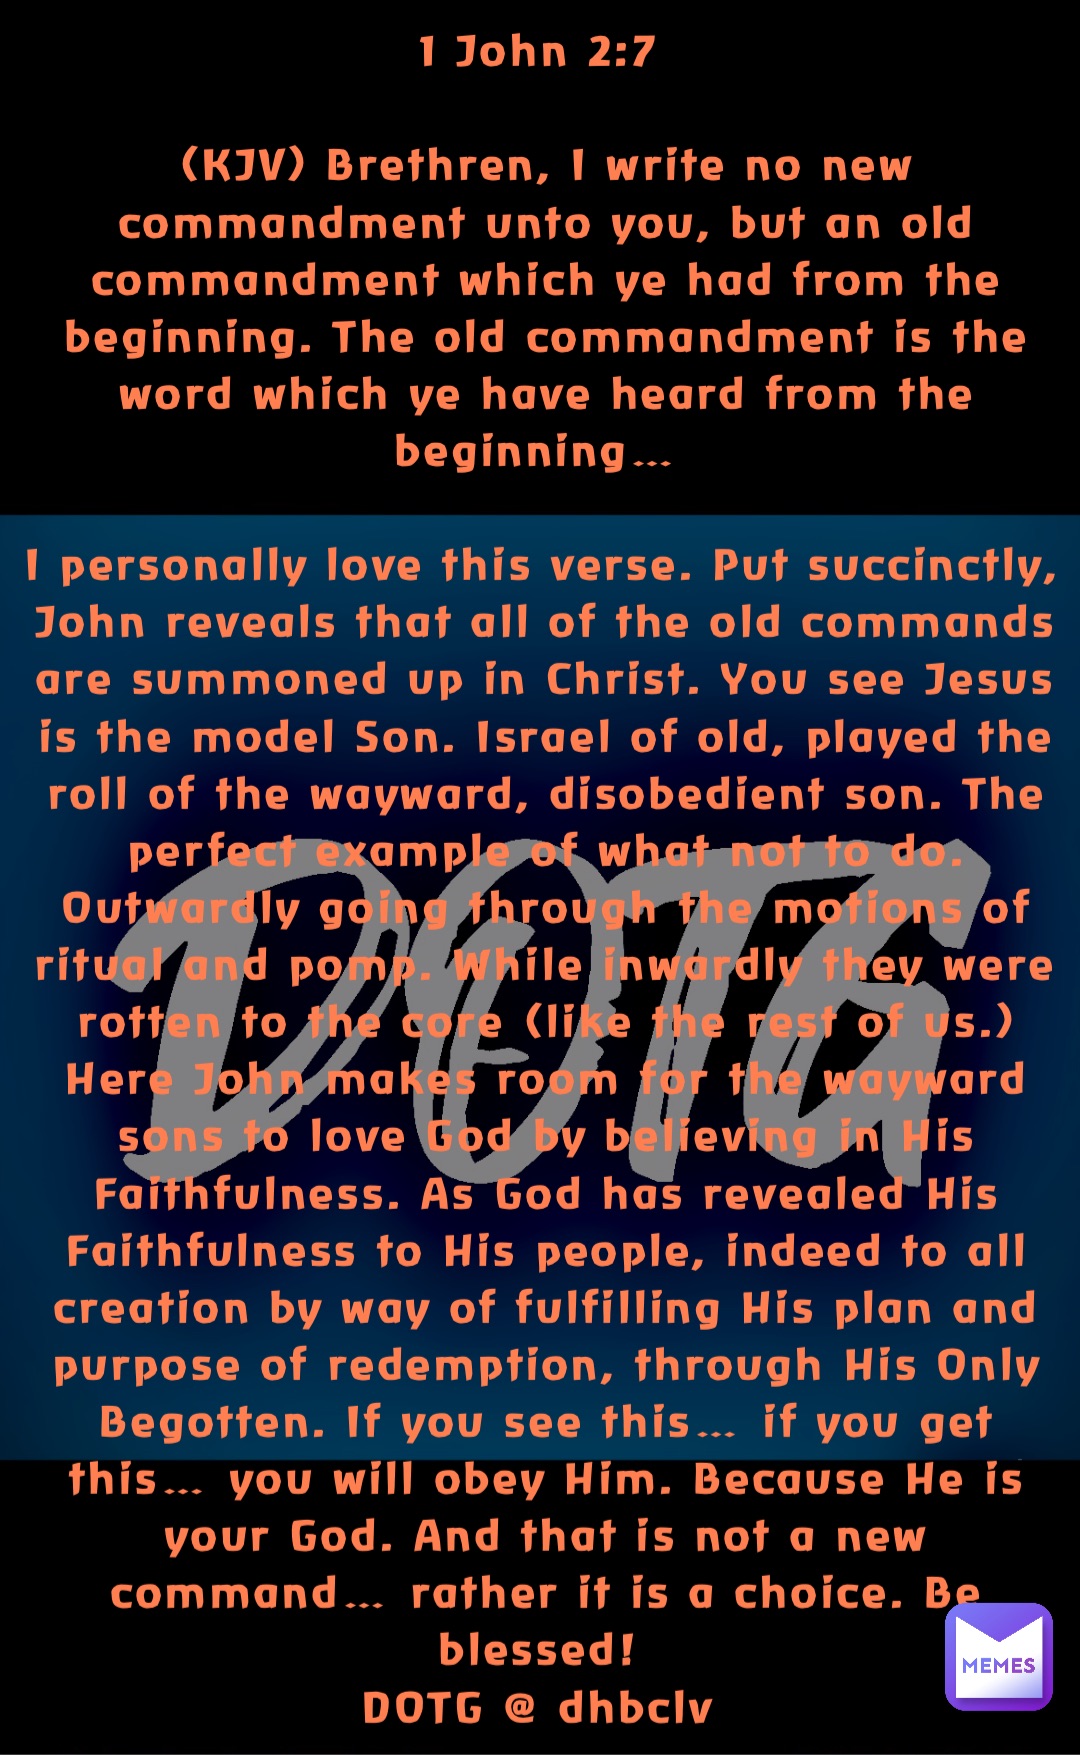 1 John 2:7

(KJV) Brethren, I write no new commandment unto you, but an old commandment which ye had from the beginning. The old commandment is the word which ye have heard from the beginning…

I personally love this verse. Put succinctly, John reveals that all of the old commands are summoned up in Christ. You see Jesus is the model Son. Israel of old, played the roll of the wayward, disobedient son. The perfect example of what not to do. Outwardly going through the motions of ritual and pomp. While inwardly they were rotten to the core (like the rest of us.) 
Here John makes room for the wayward sons to love God by believing in His Faithfulness. As God has revealed His Faithfulness to His people, indeed to all creation by way of fulfilling His plan and purpose of redemption, through His Only Begotten. If you see this… if you get this… you will obey Him. Because He is your God. And that is not a new command… rather it is a choice. Be blessed!
DOTG @ dhbclv